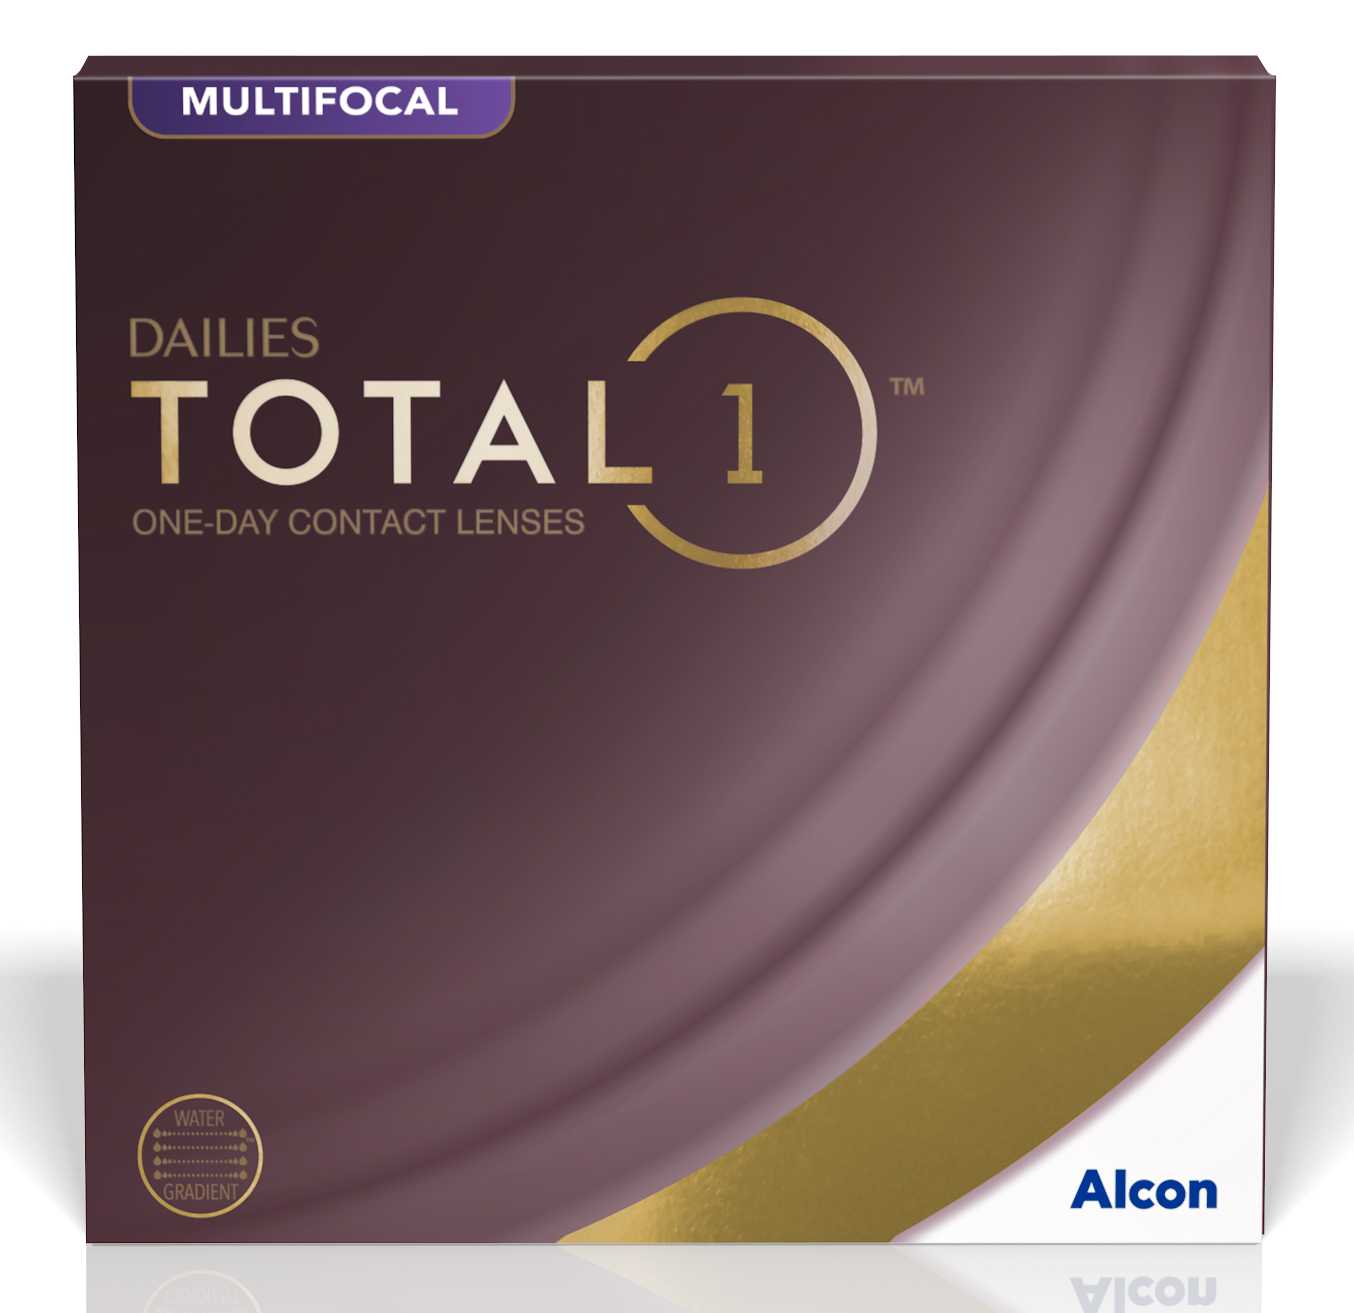  DAILIES TOTAL 1 MULTIFOCAL 90 ALCON